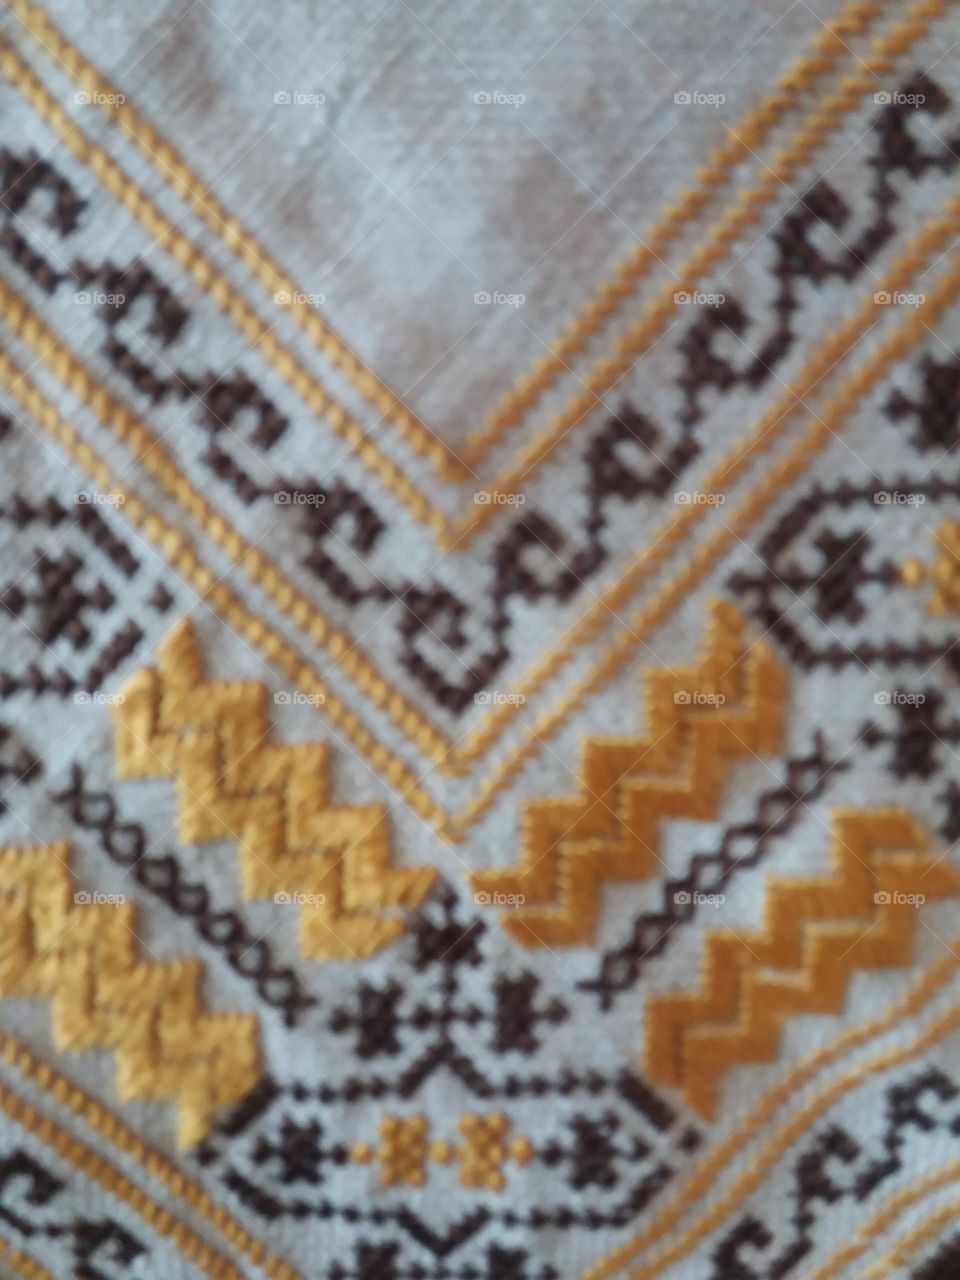 Bulgarian embrodery